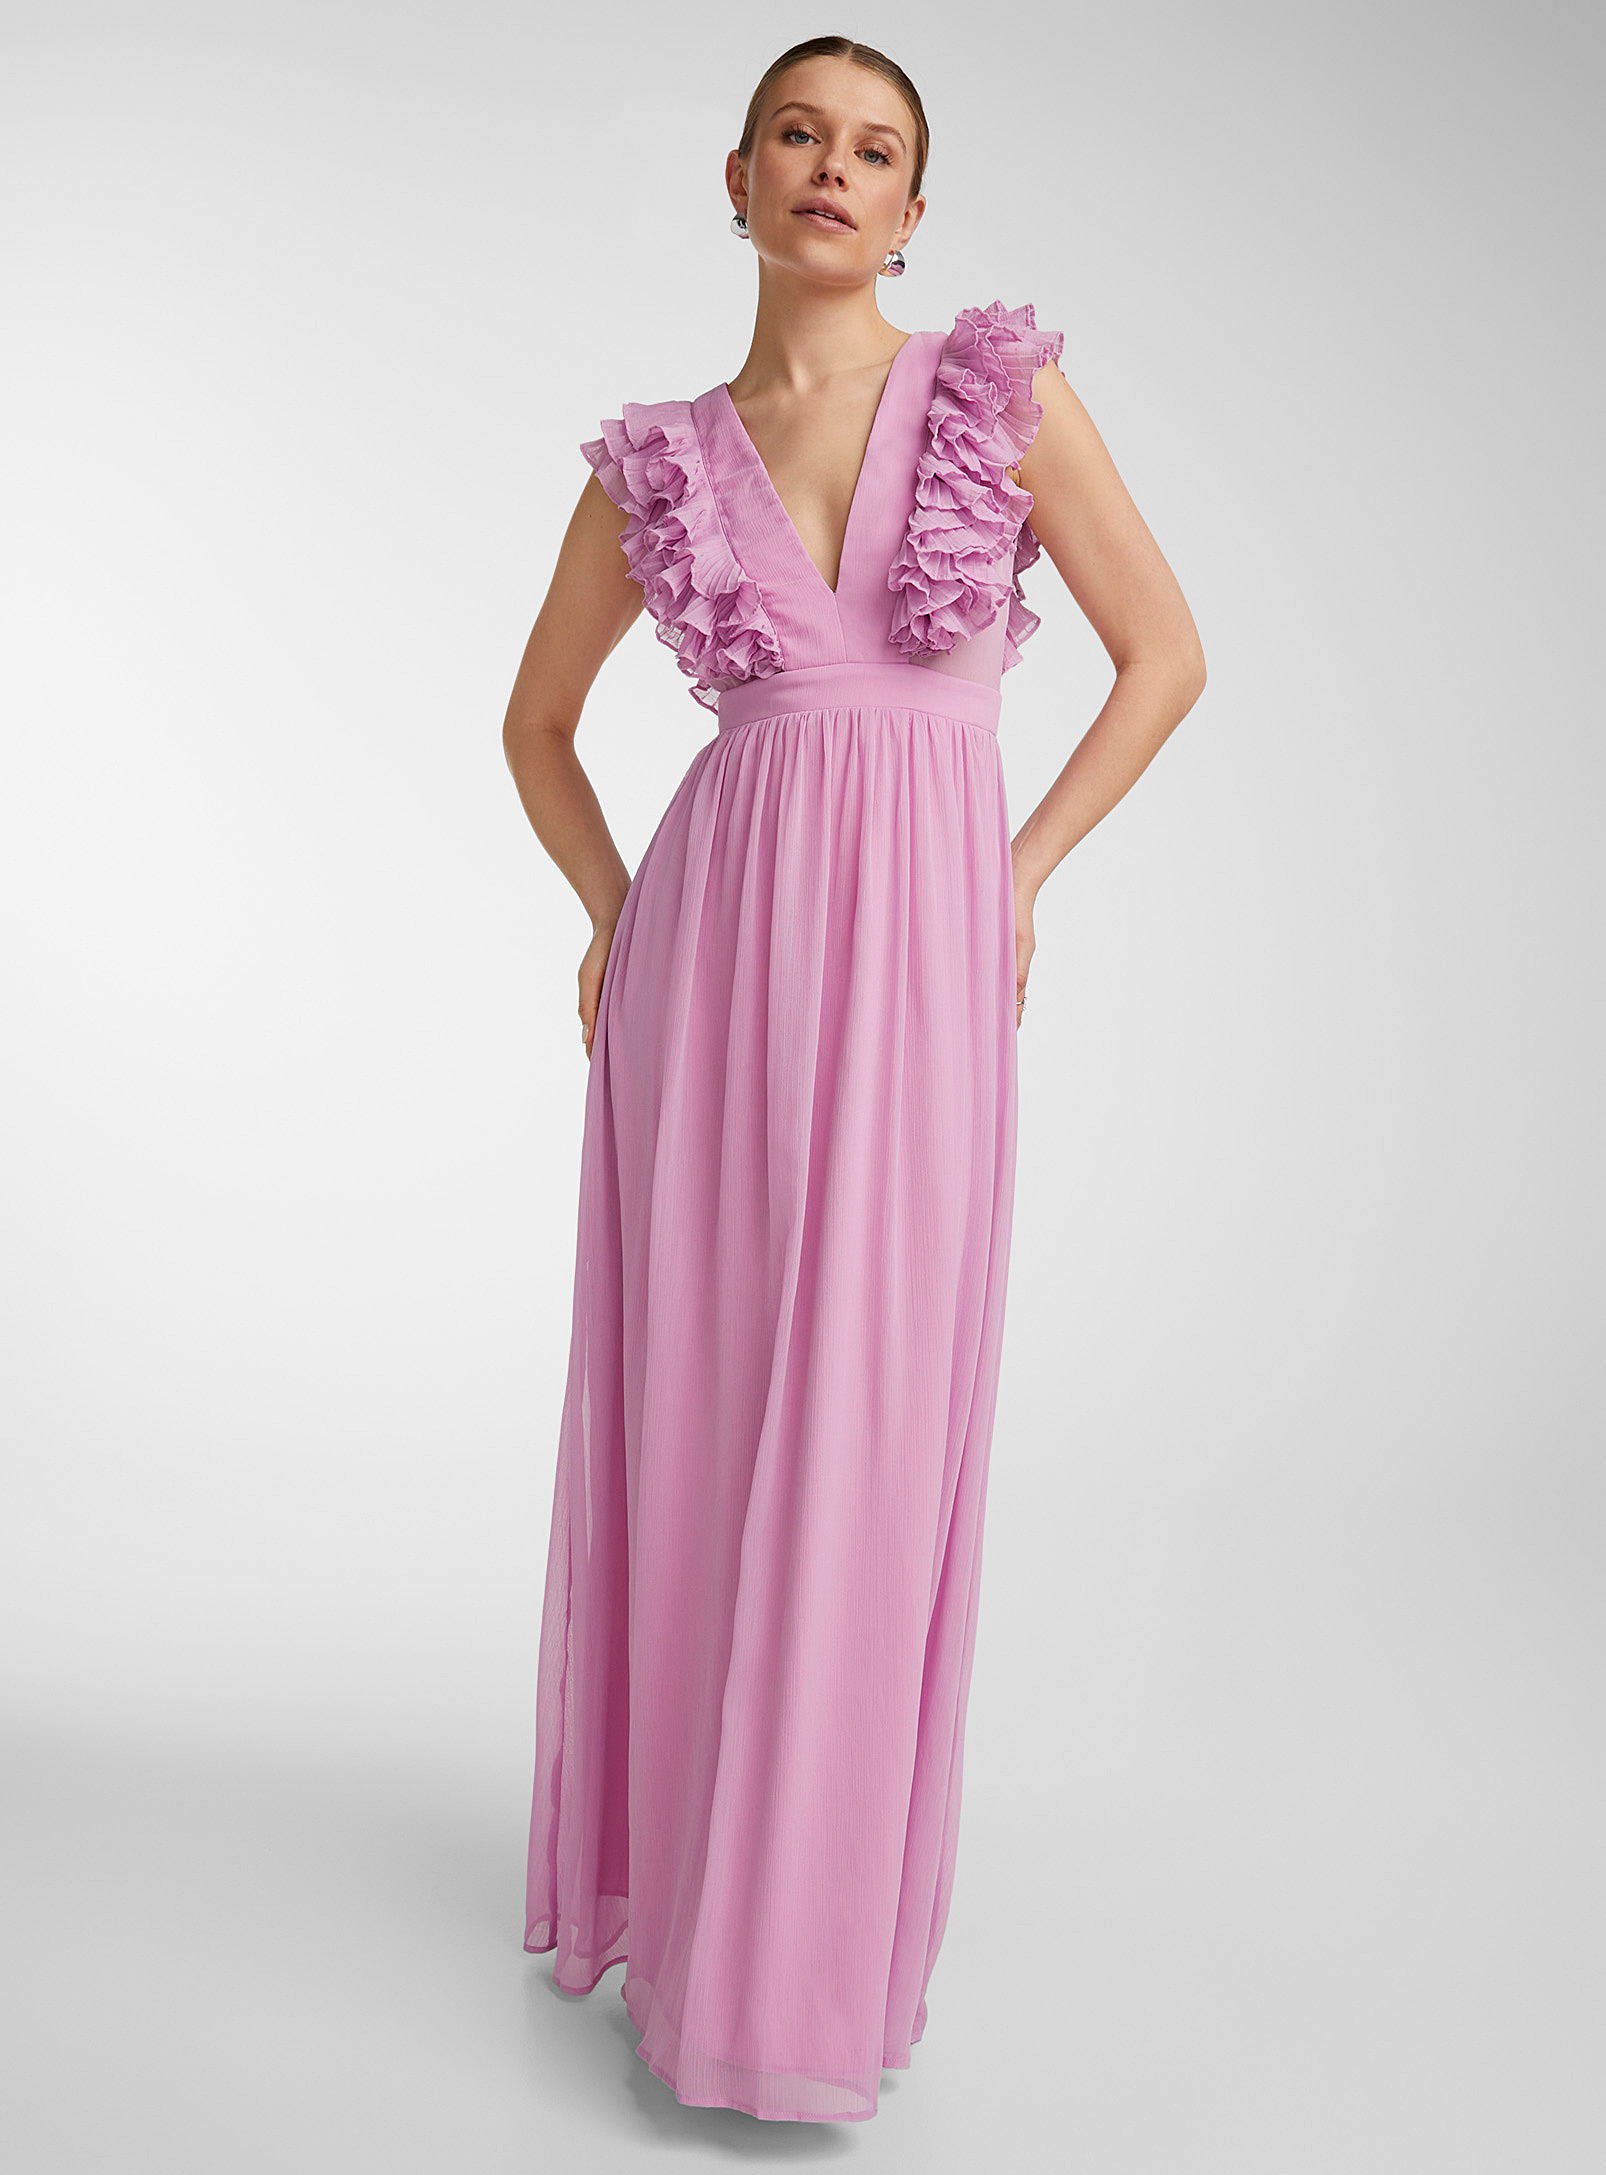 Icone Tiered Ruffles Pink Maxi Dress